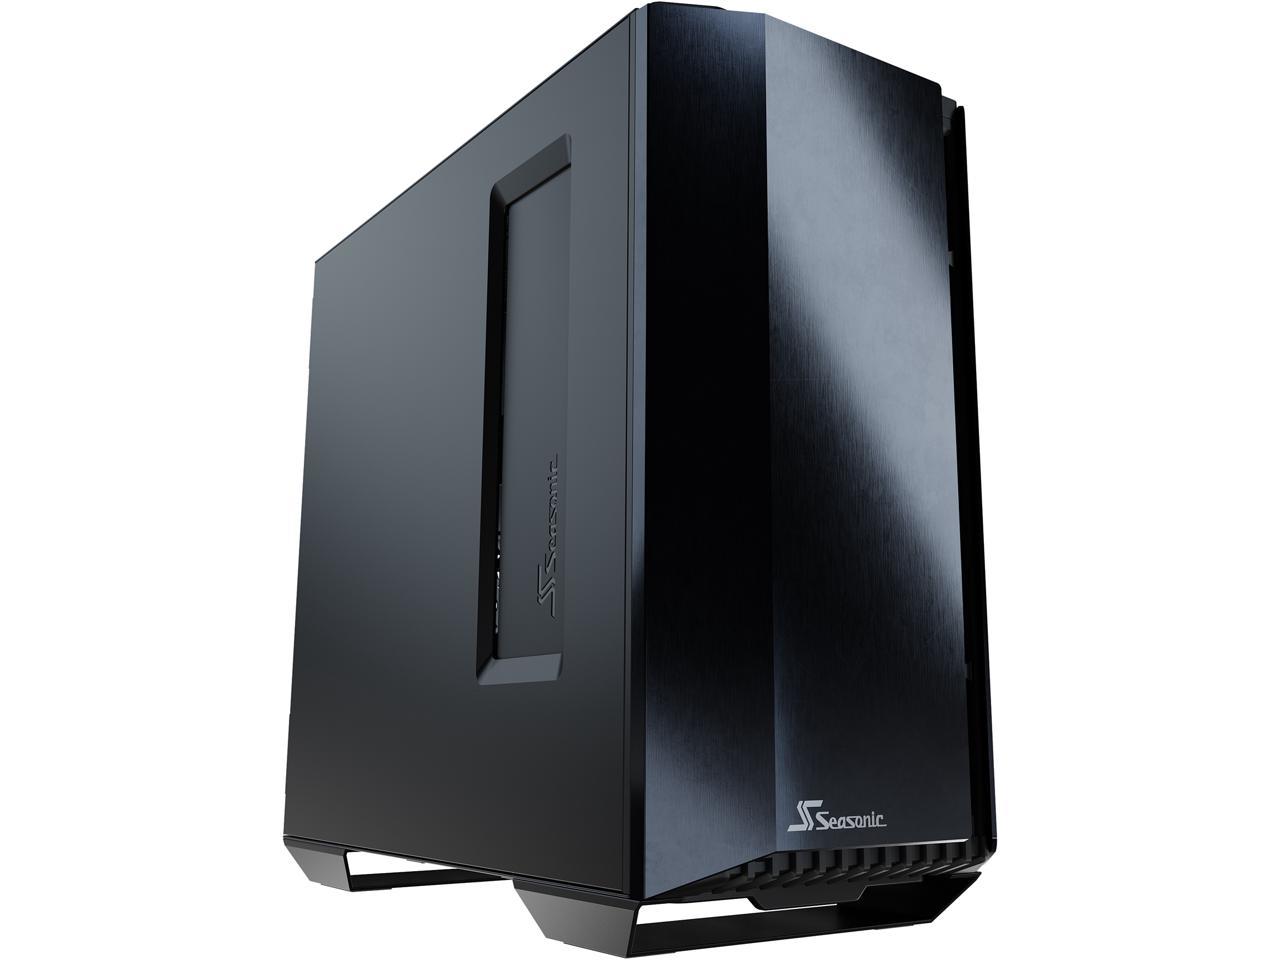 Seasonic SYNCRO Q704 Computer Case - Inverted ATX Design - Mostly 5 Star Reviews $59.99